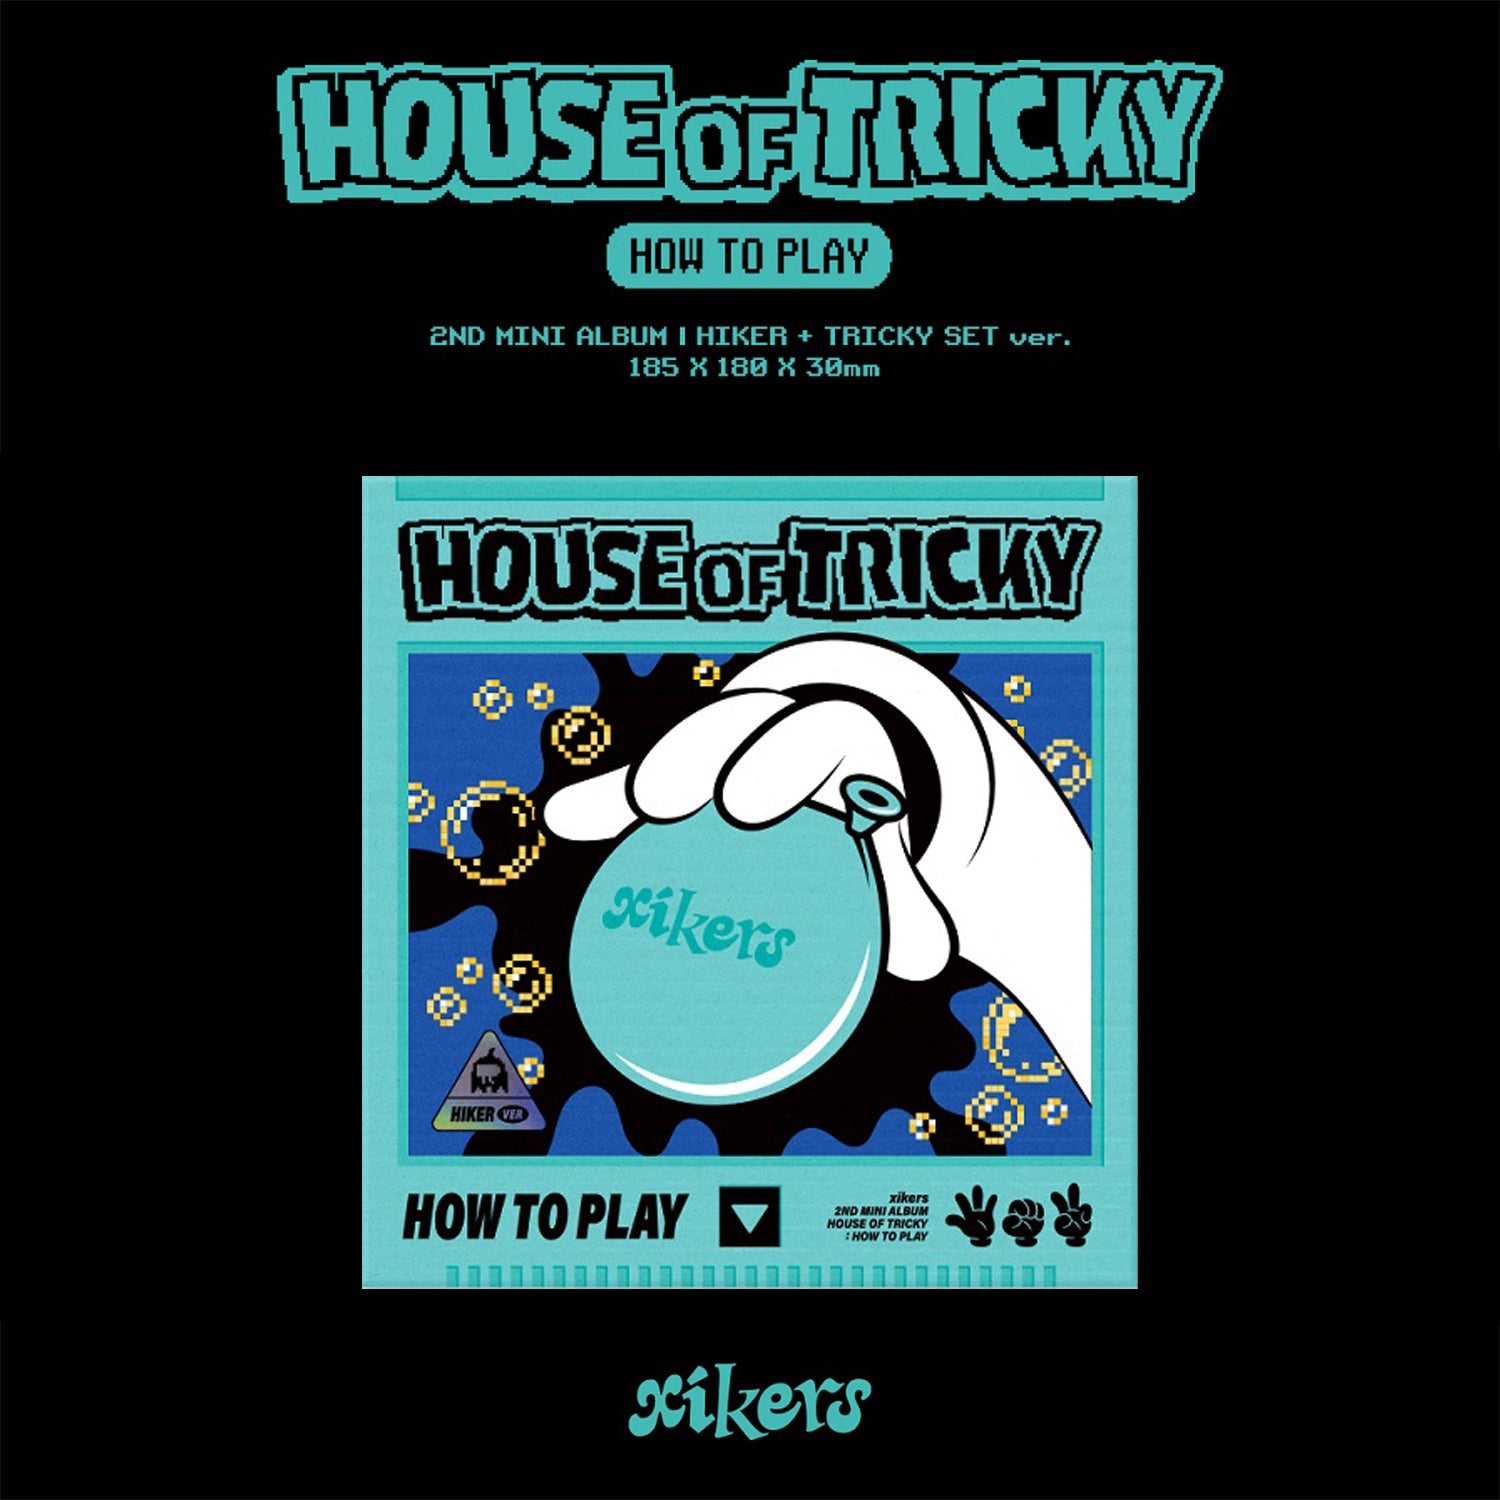 XIKERS 2ND MINI ALBUM 'HOUSE OF TRICKY : HOW TO PLAY' HIKER VERSION COVER